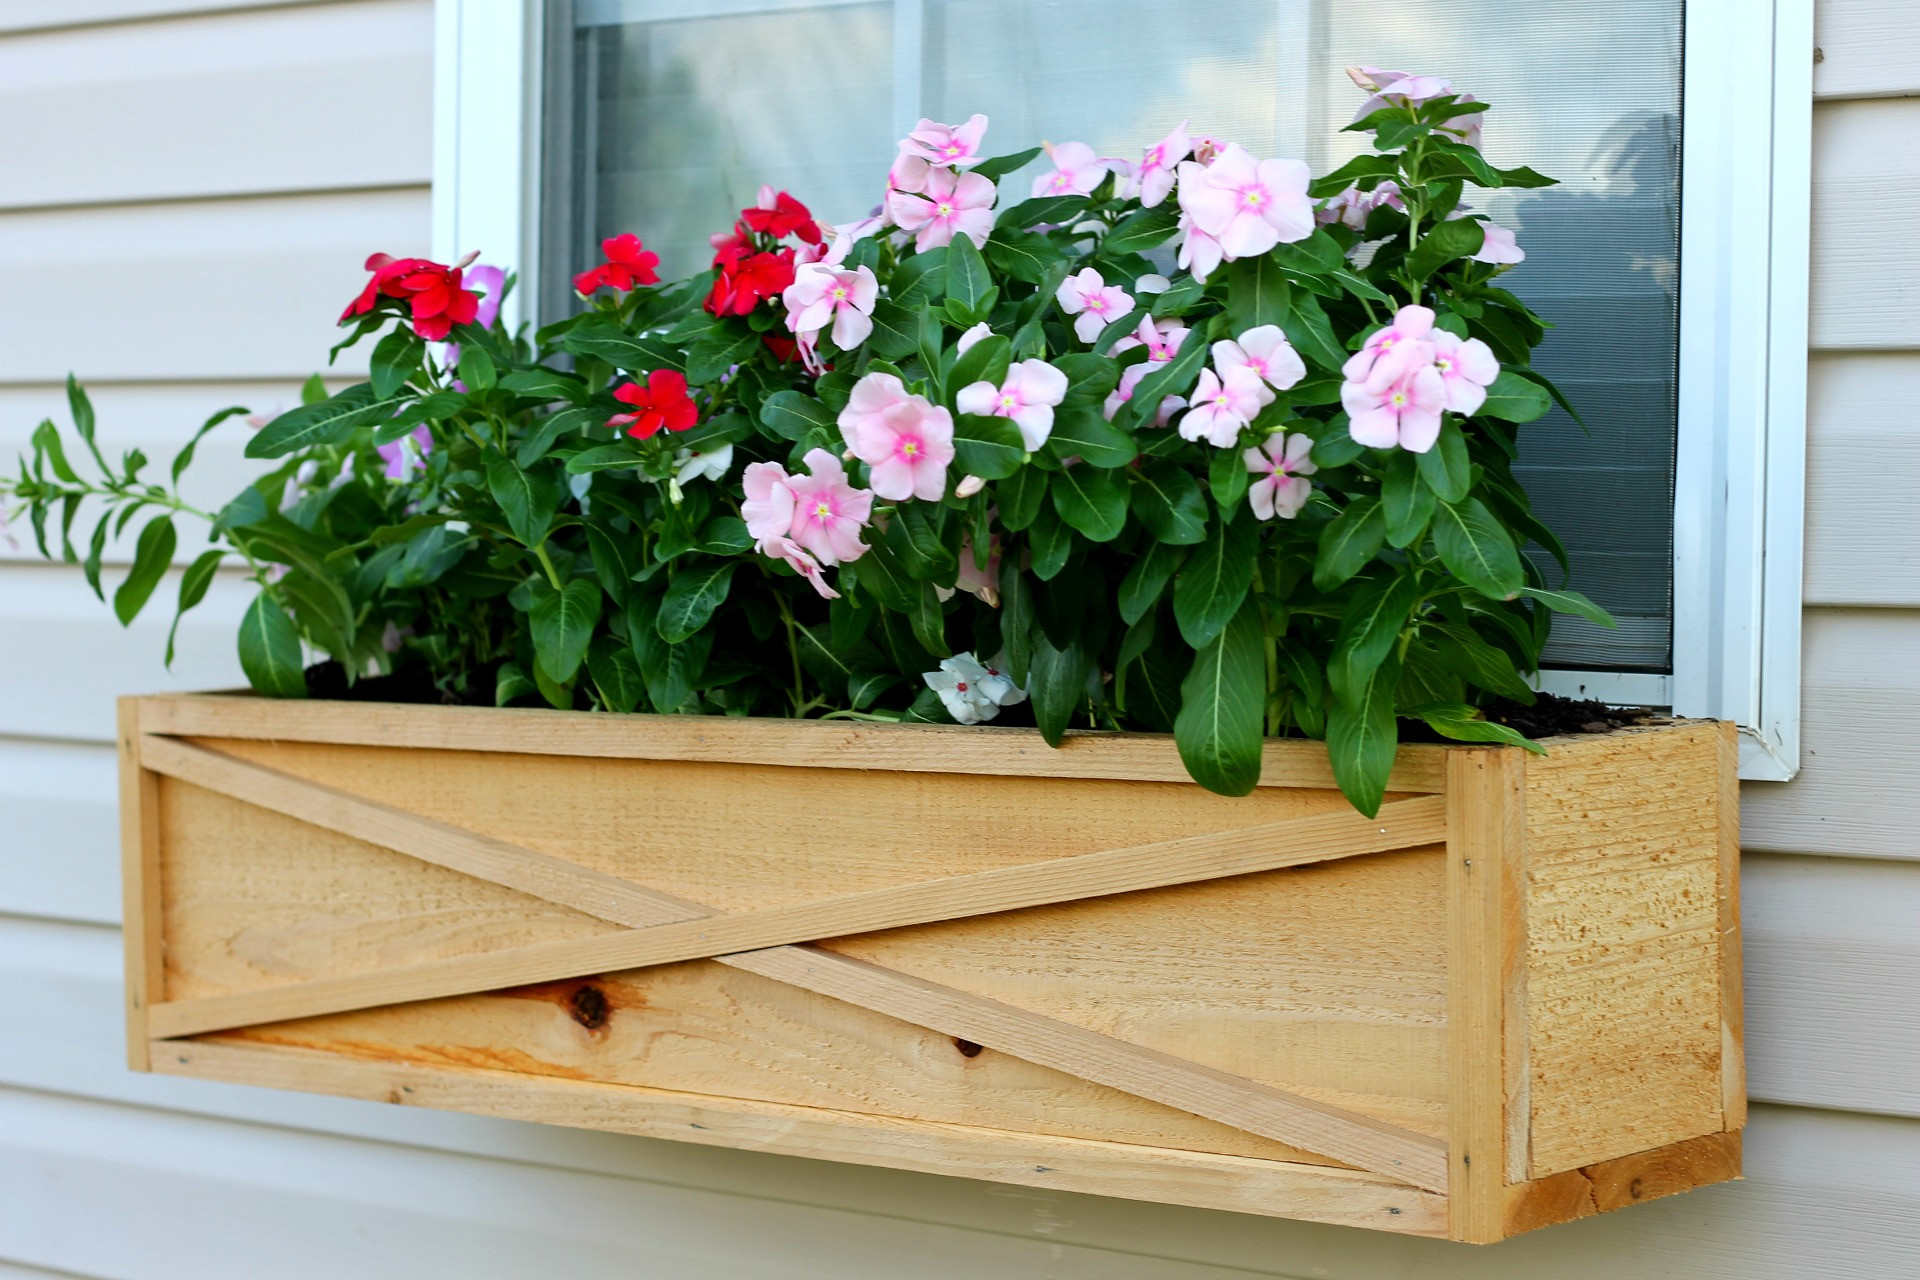 DIY Window Flower Boxes
 23 DIY Window Box Ideas Build And Fill Them With Colorful